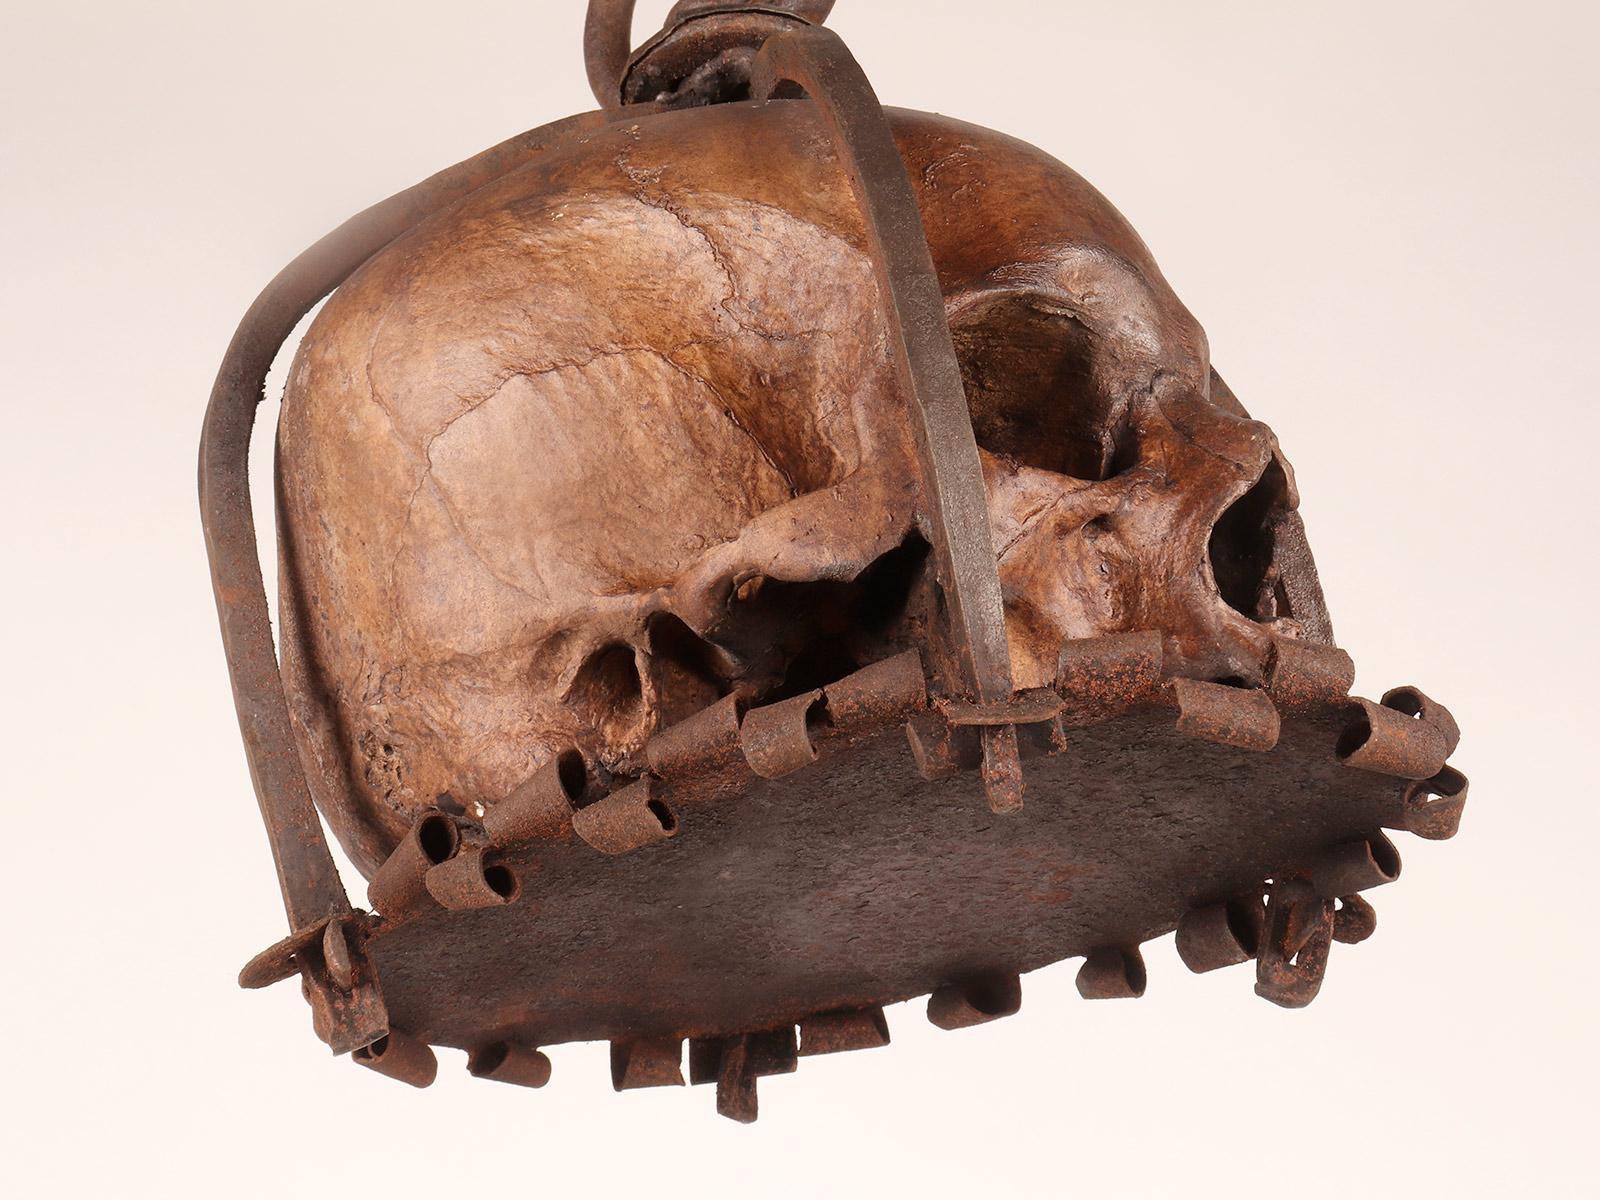 Memento mori. A caged and suspended skull sculpture, Germany, late 17th century. 11